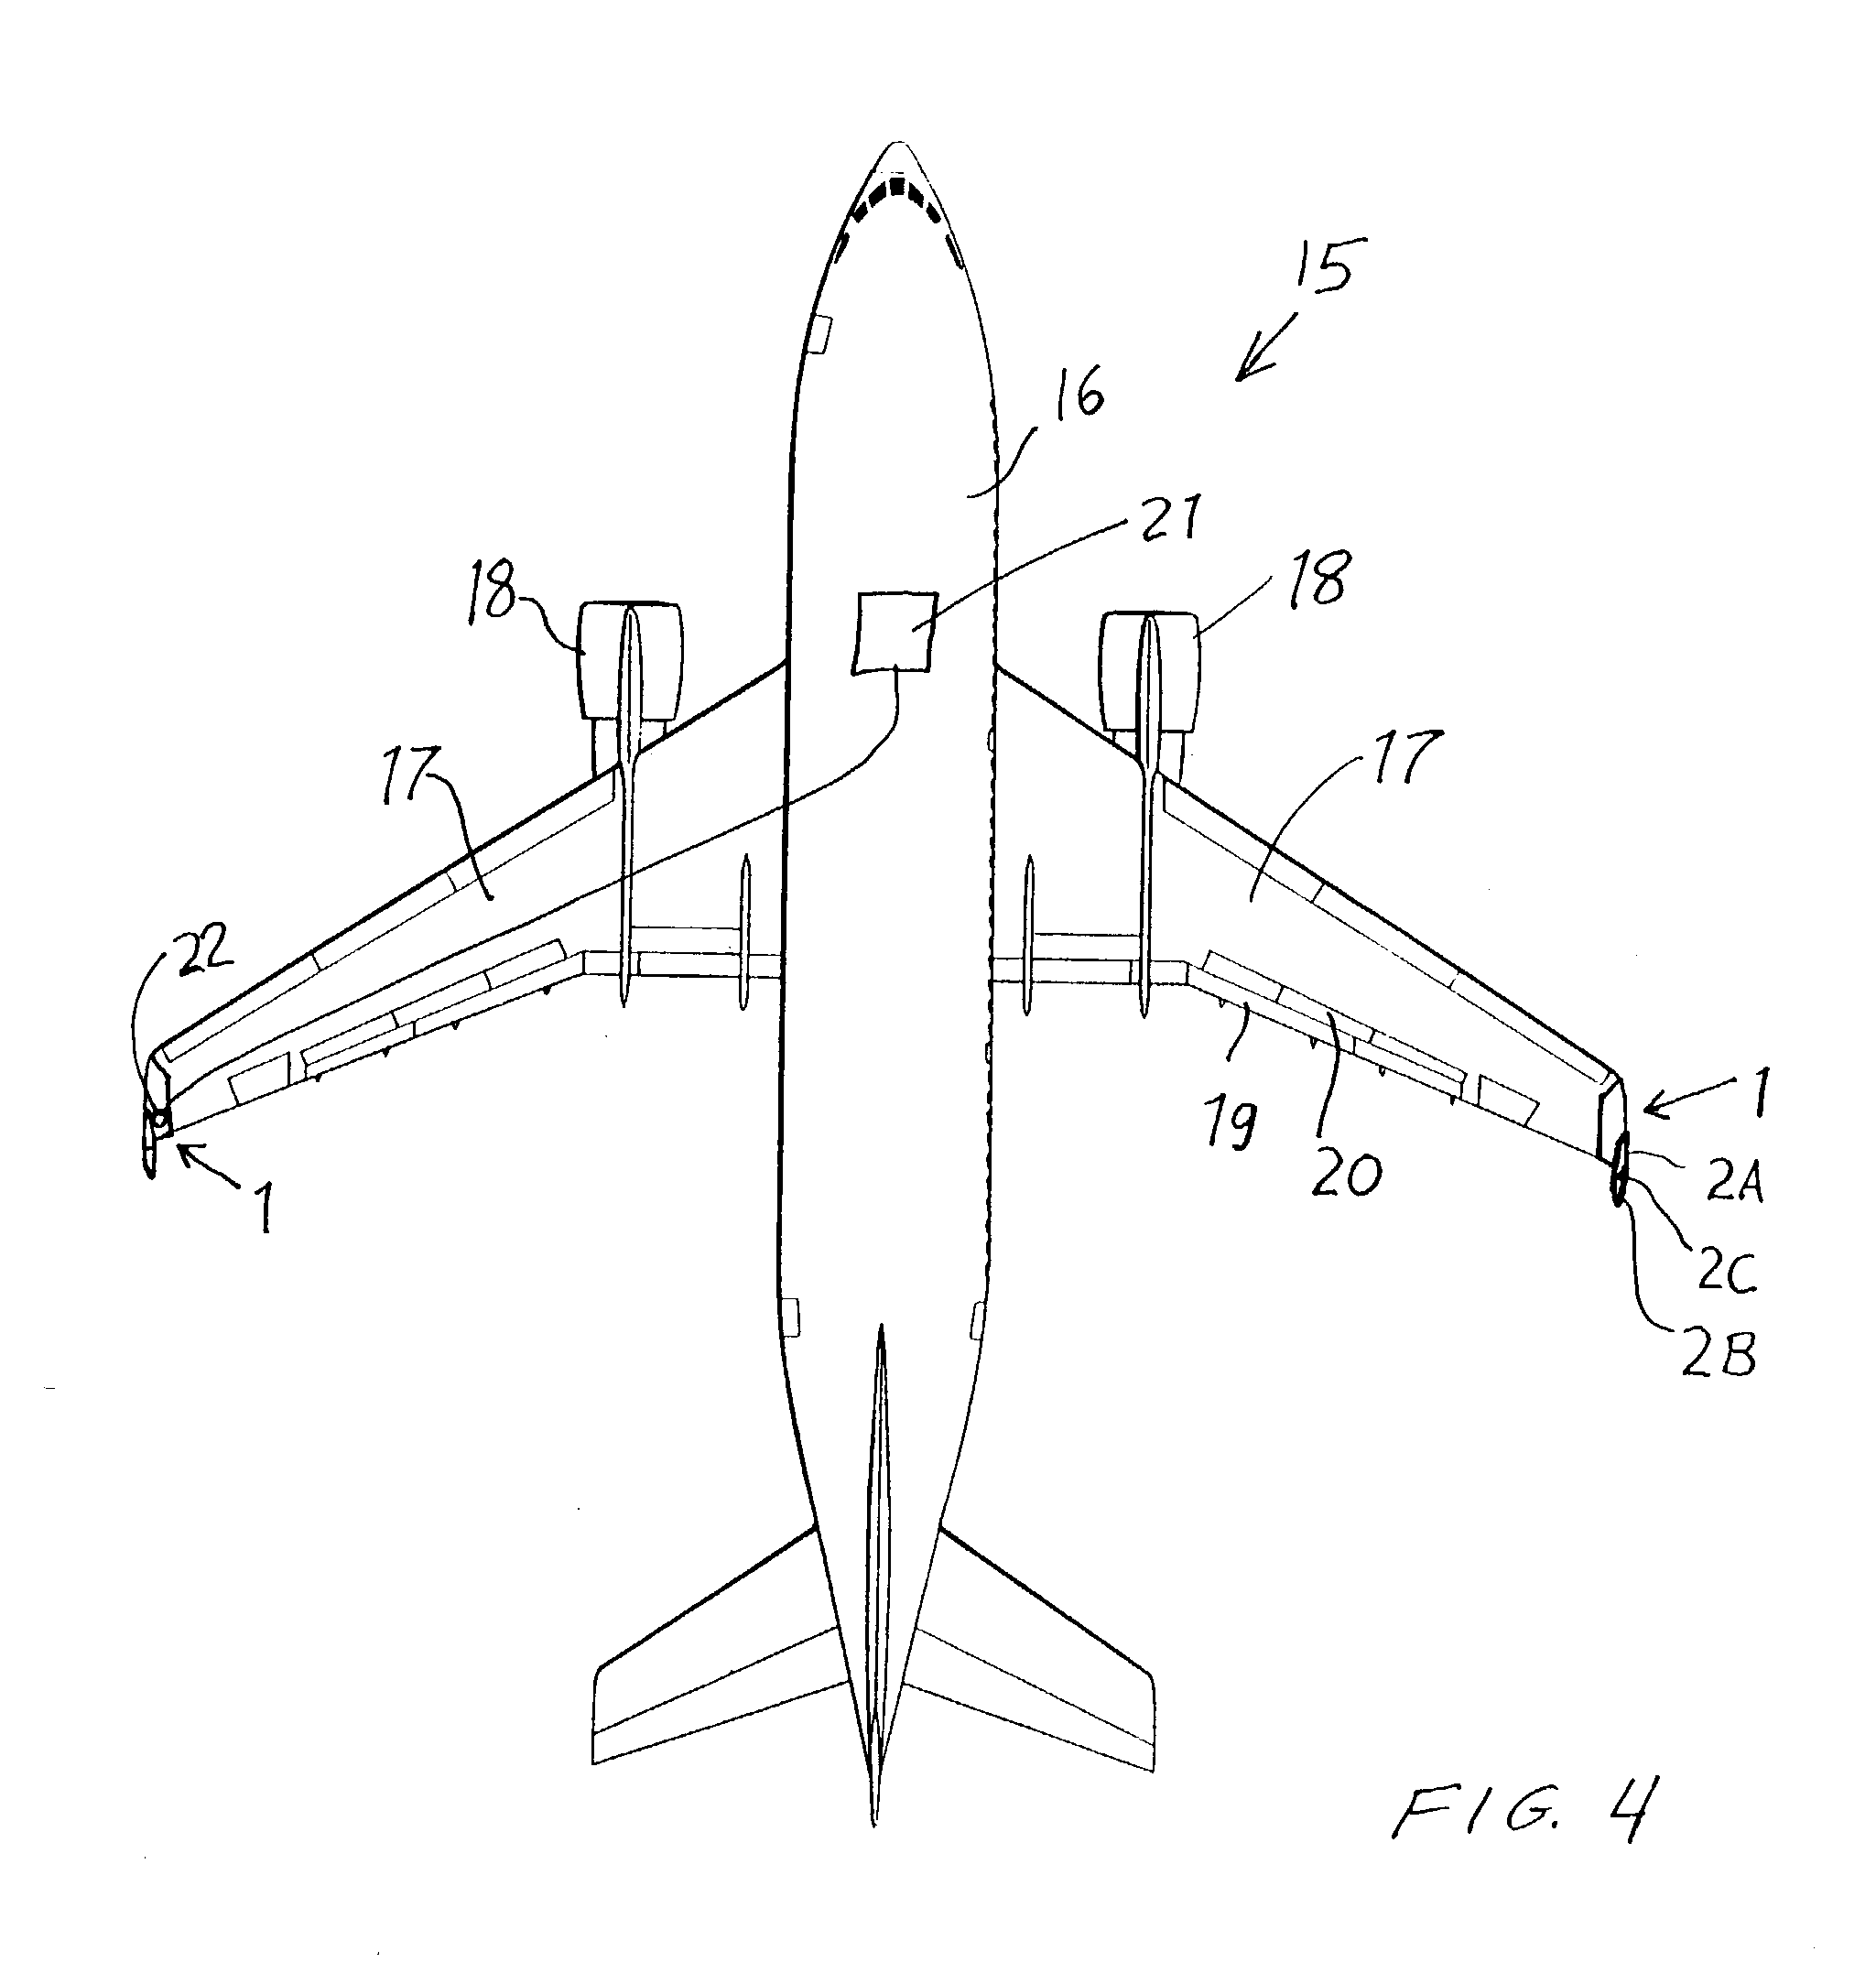 Method and device for steepening a landing approach of an aircraft